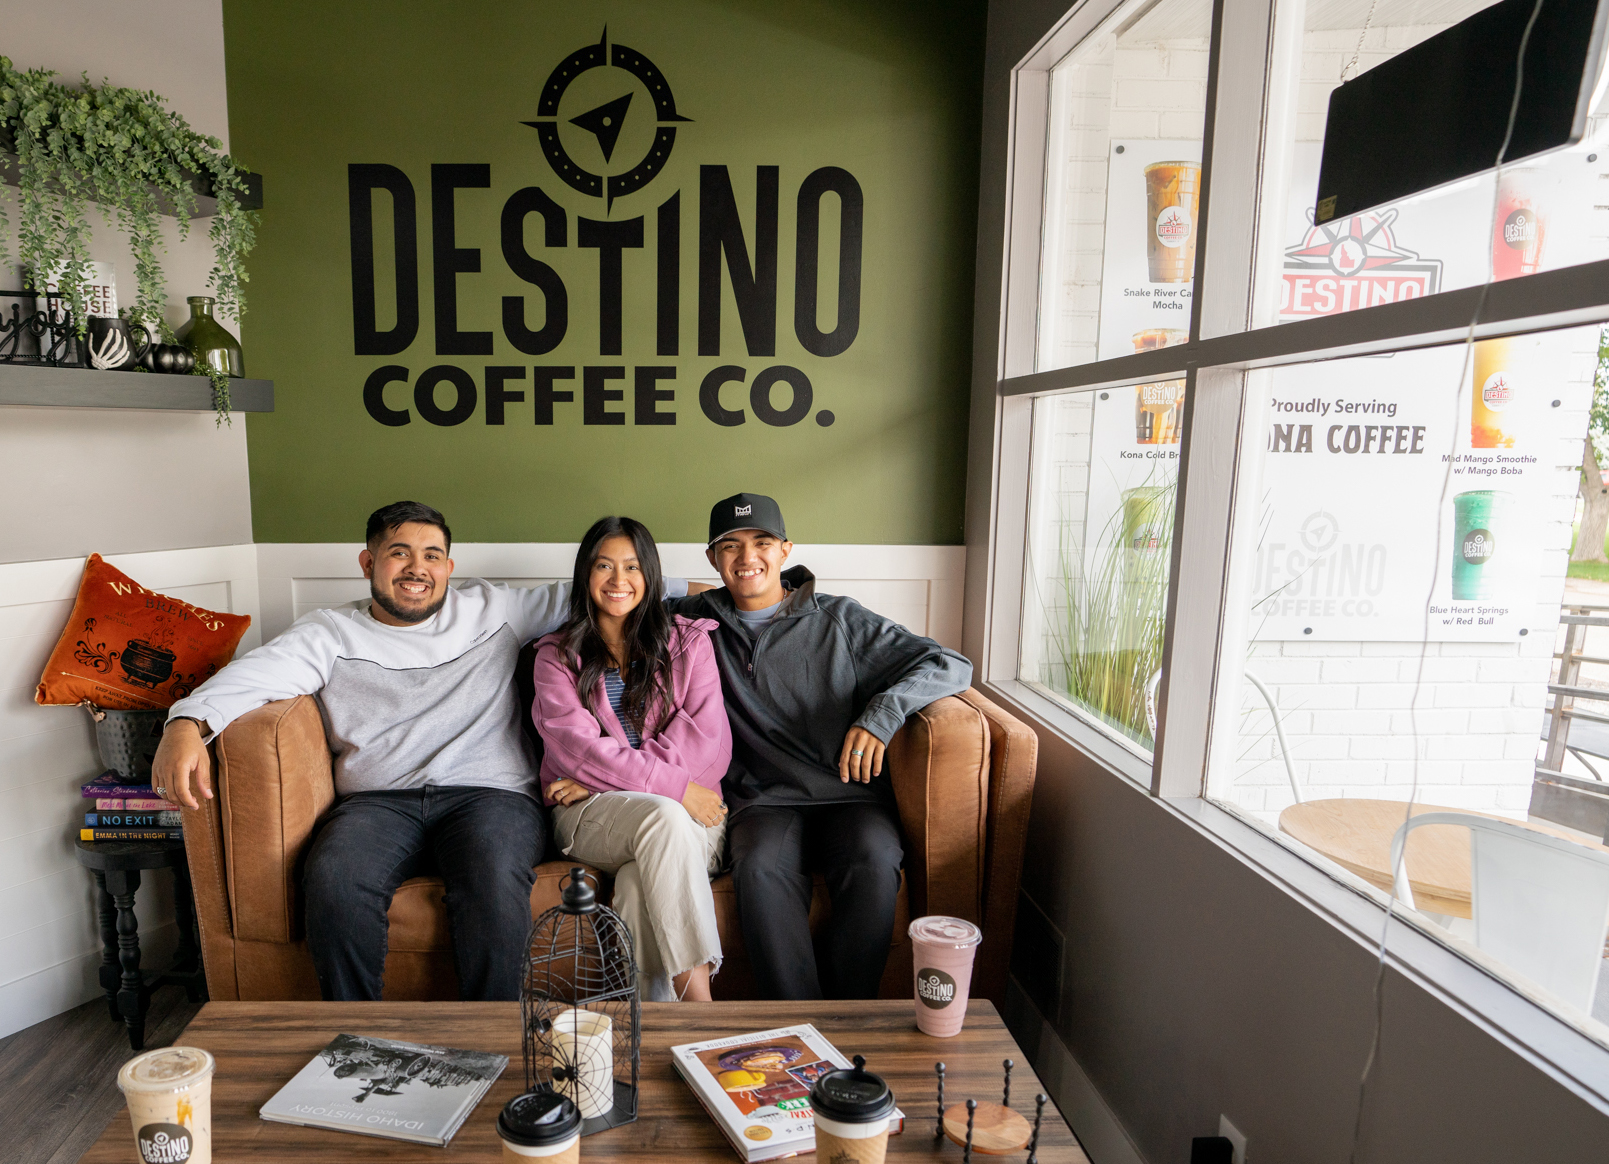 The three siblings that run Destino Coffee Co sitting on a couch together at the store front.